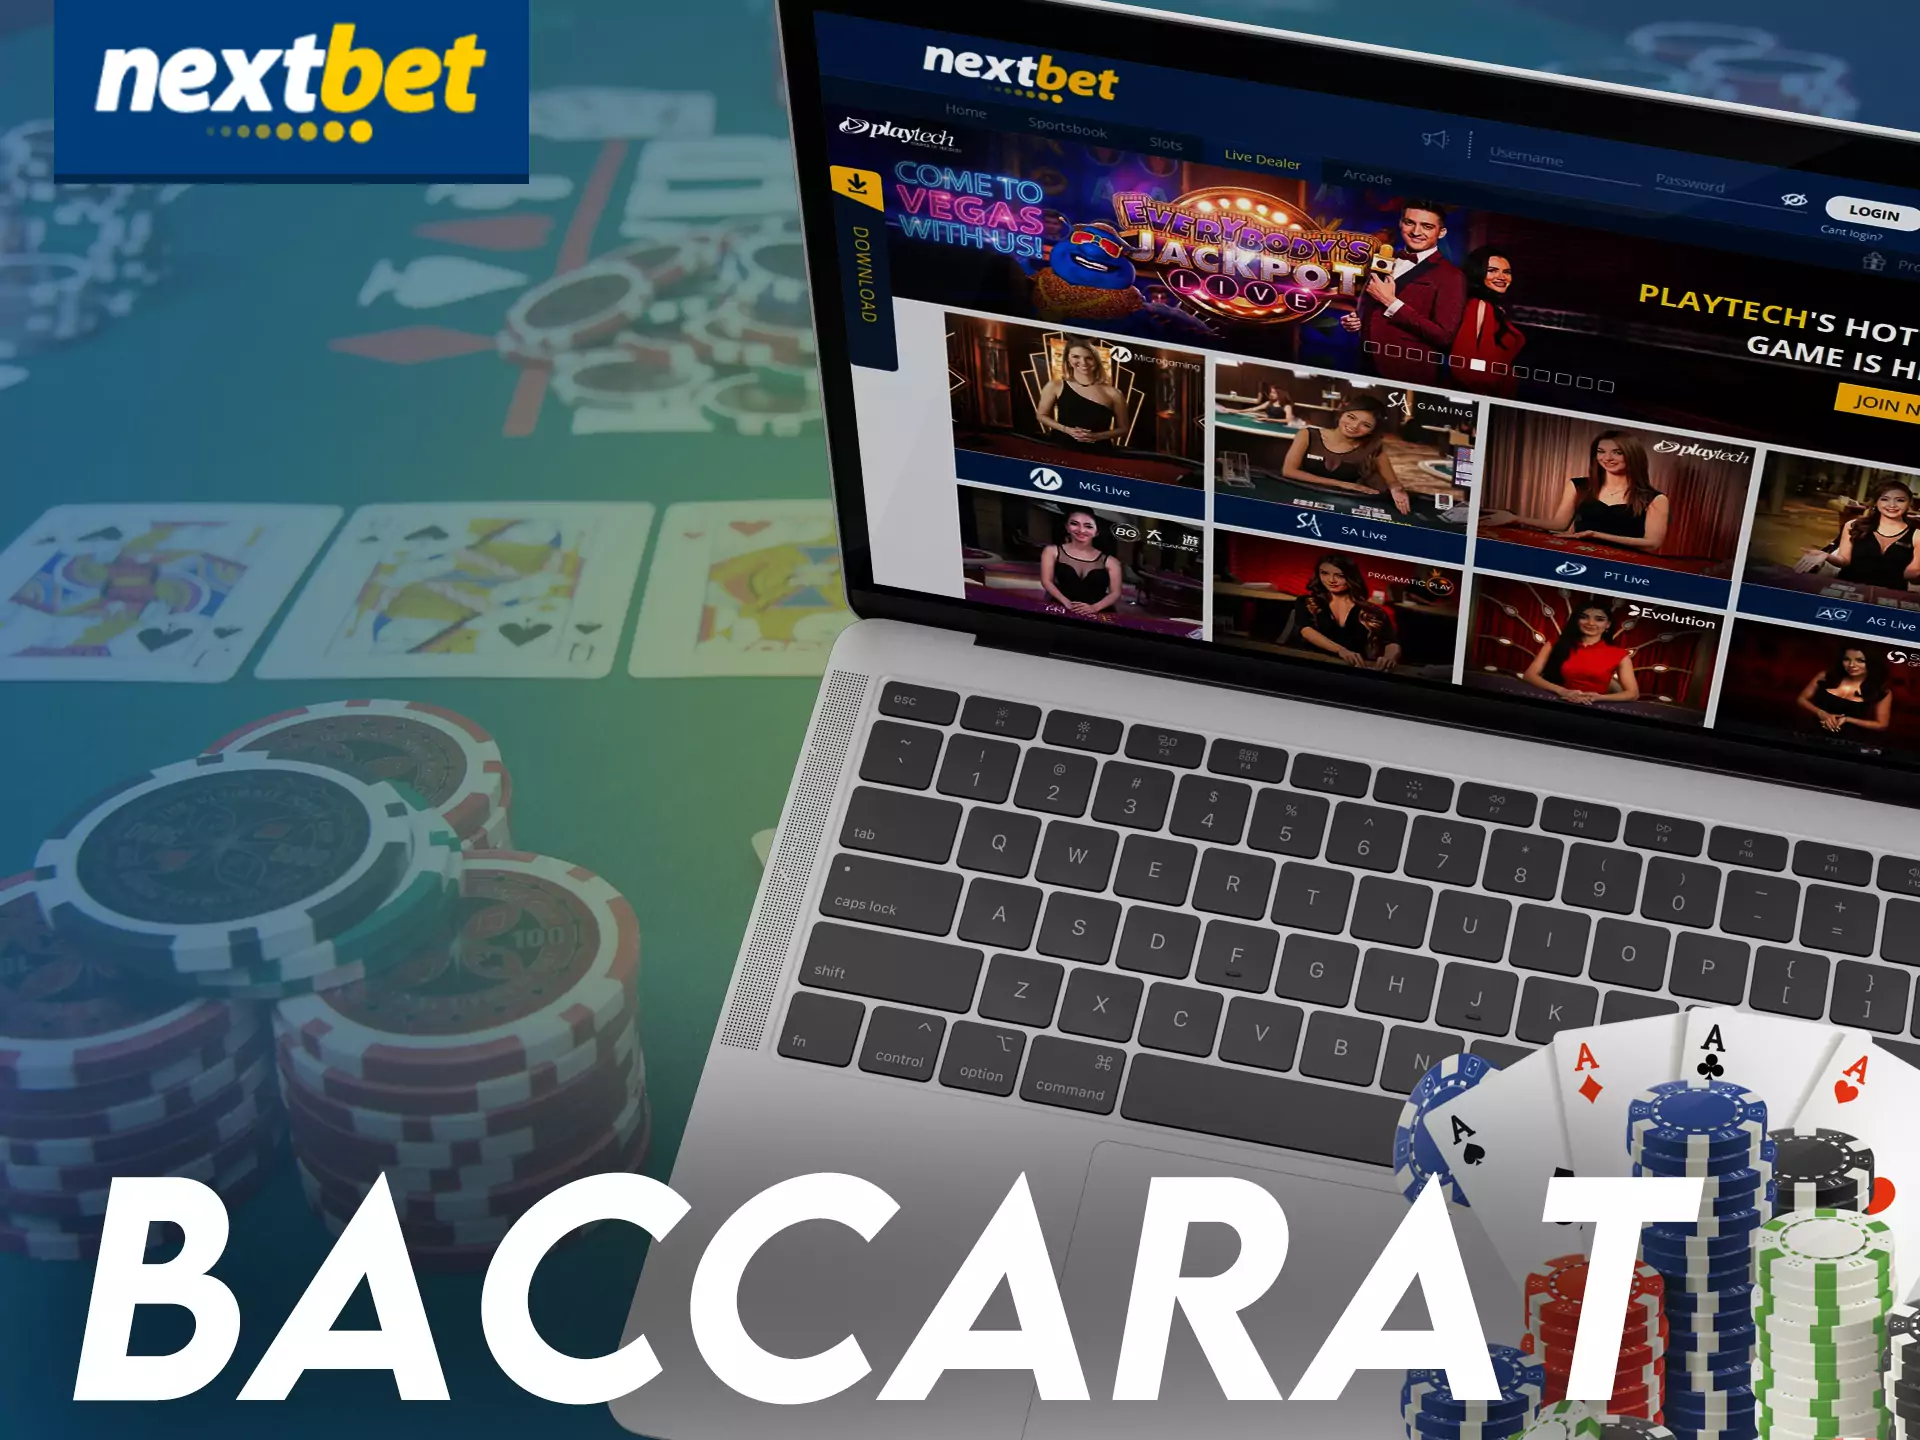 You can play baccarat at Nextbet Casino.